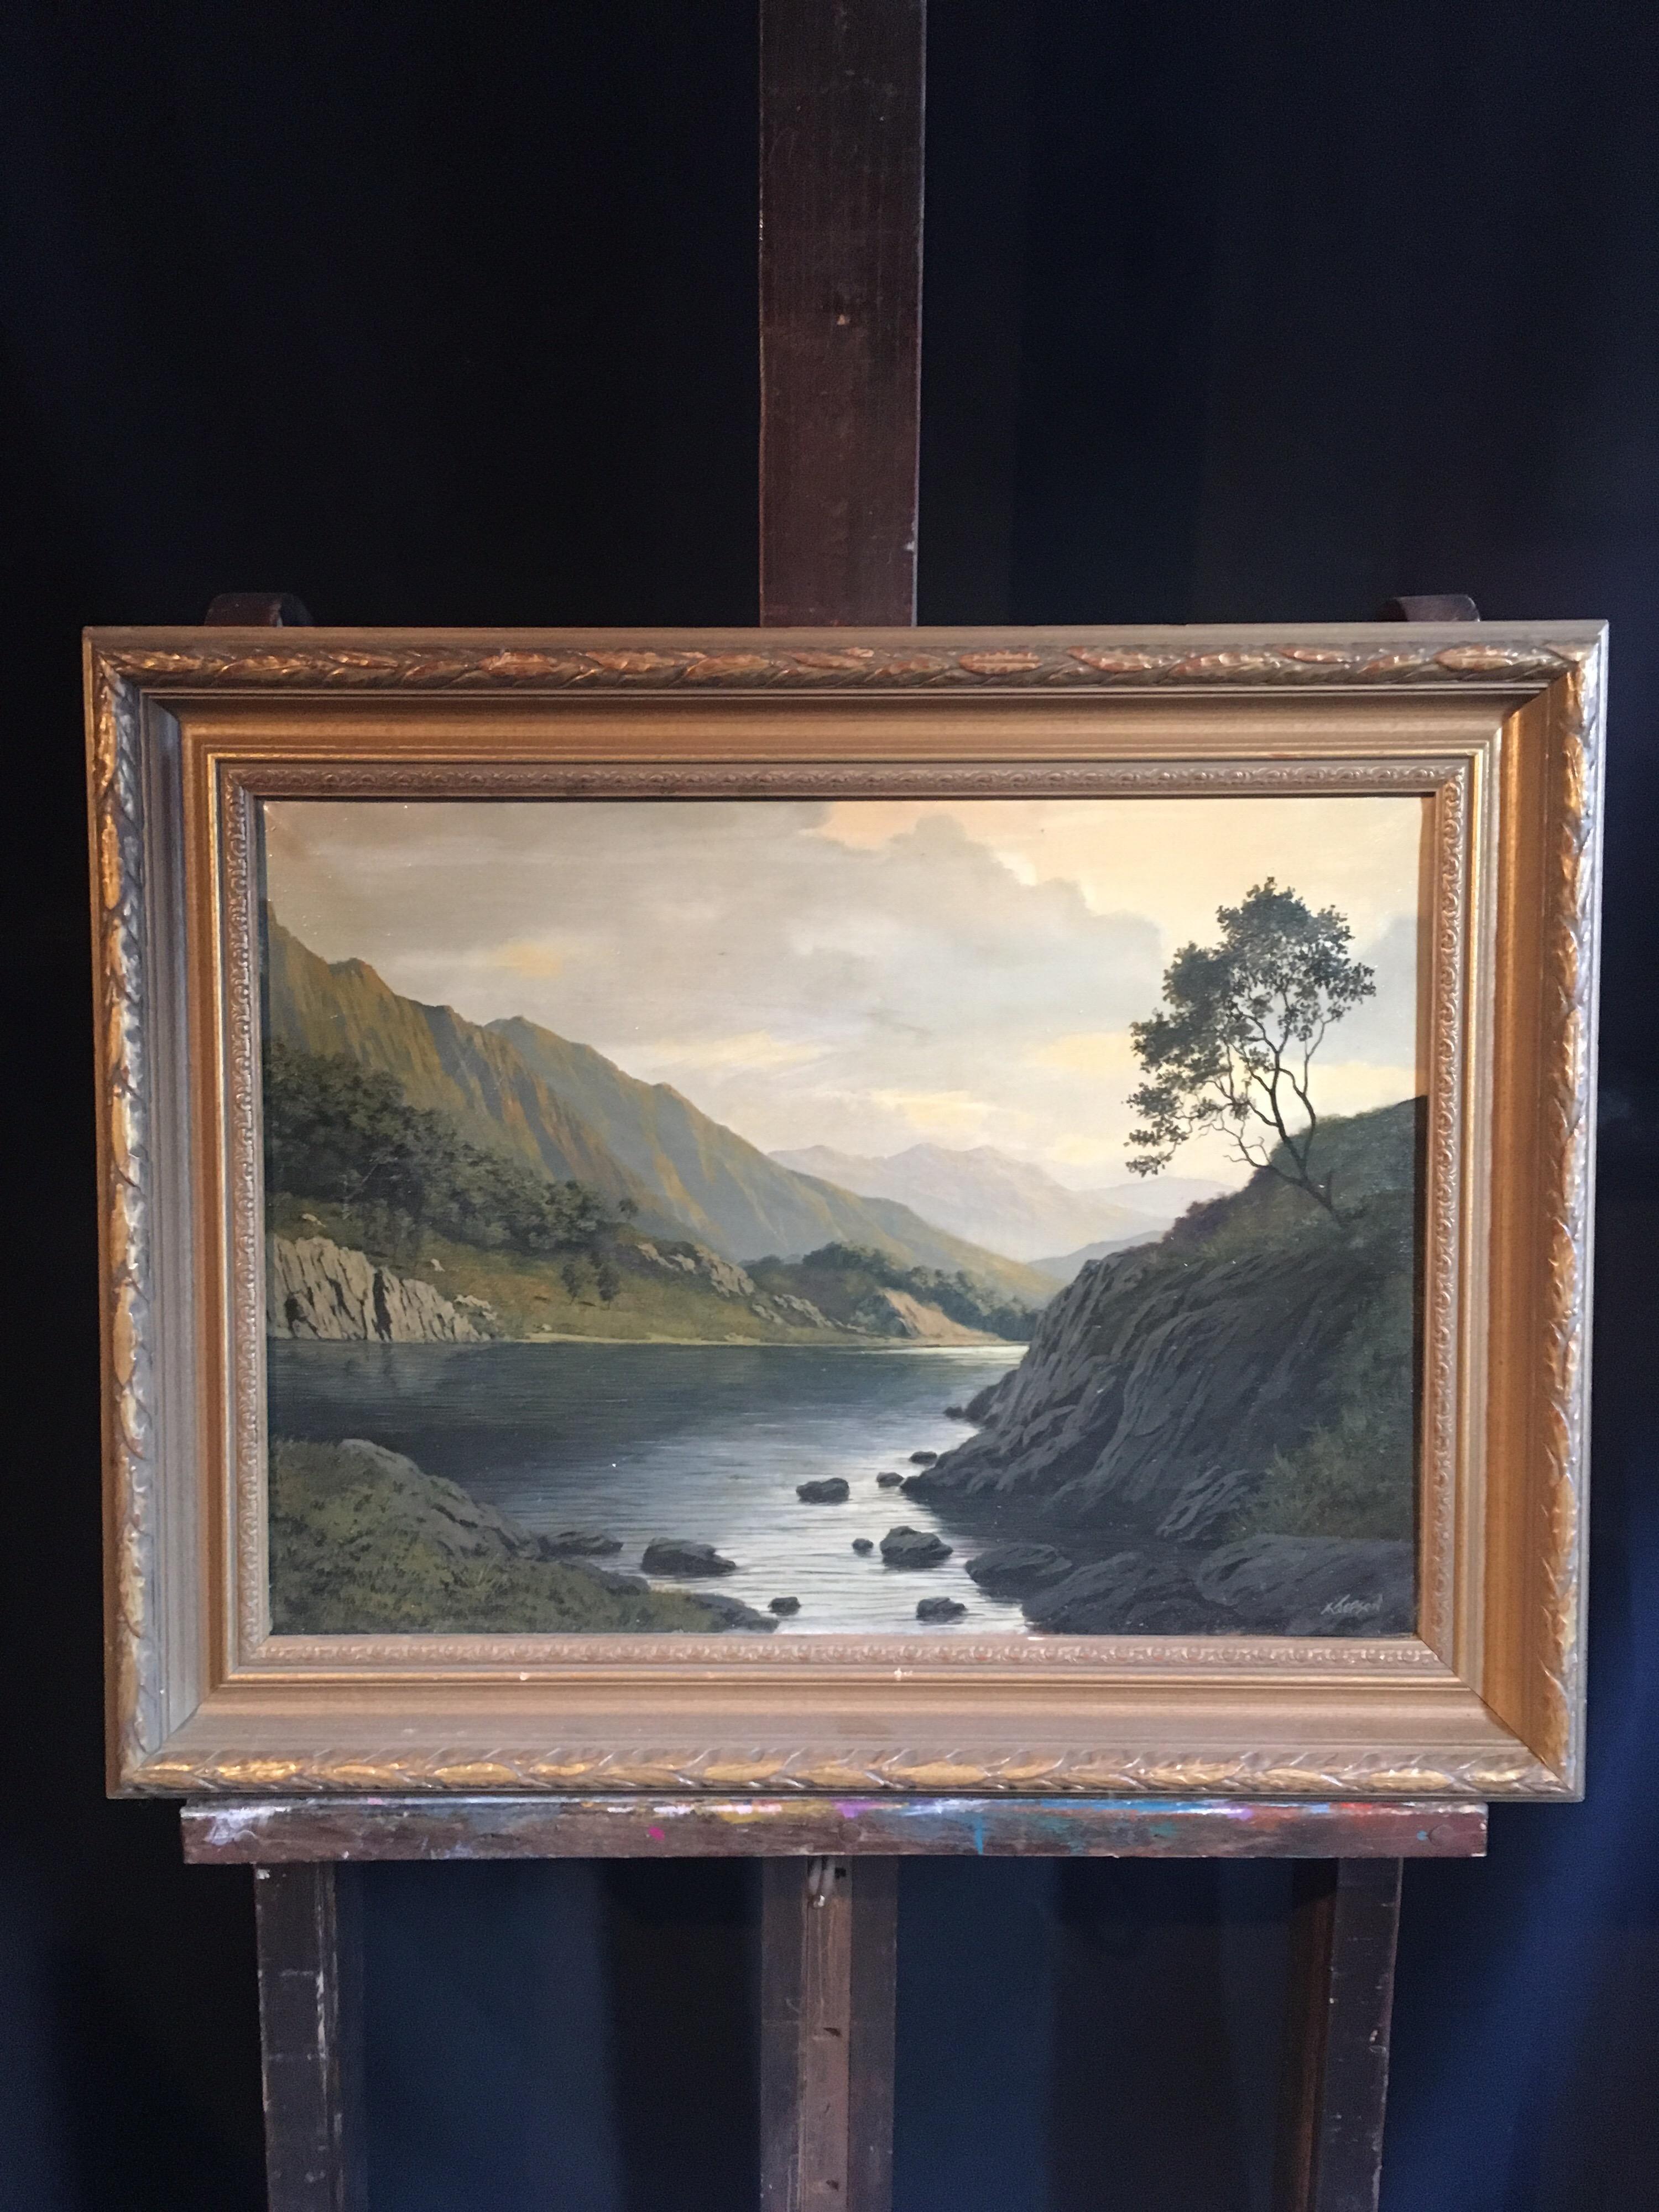 Across the Valley, Signed Original Oil Painting
By British artist K.Jepson, 20th Century
Signed by the artist on the lower right hand corner
Oil painting on canvas, framed
Framed size: 22 x 28 inches

A beautiful oil painting of a secluded valley.